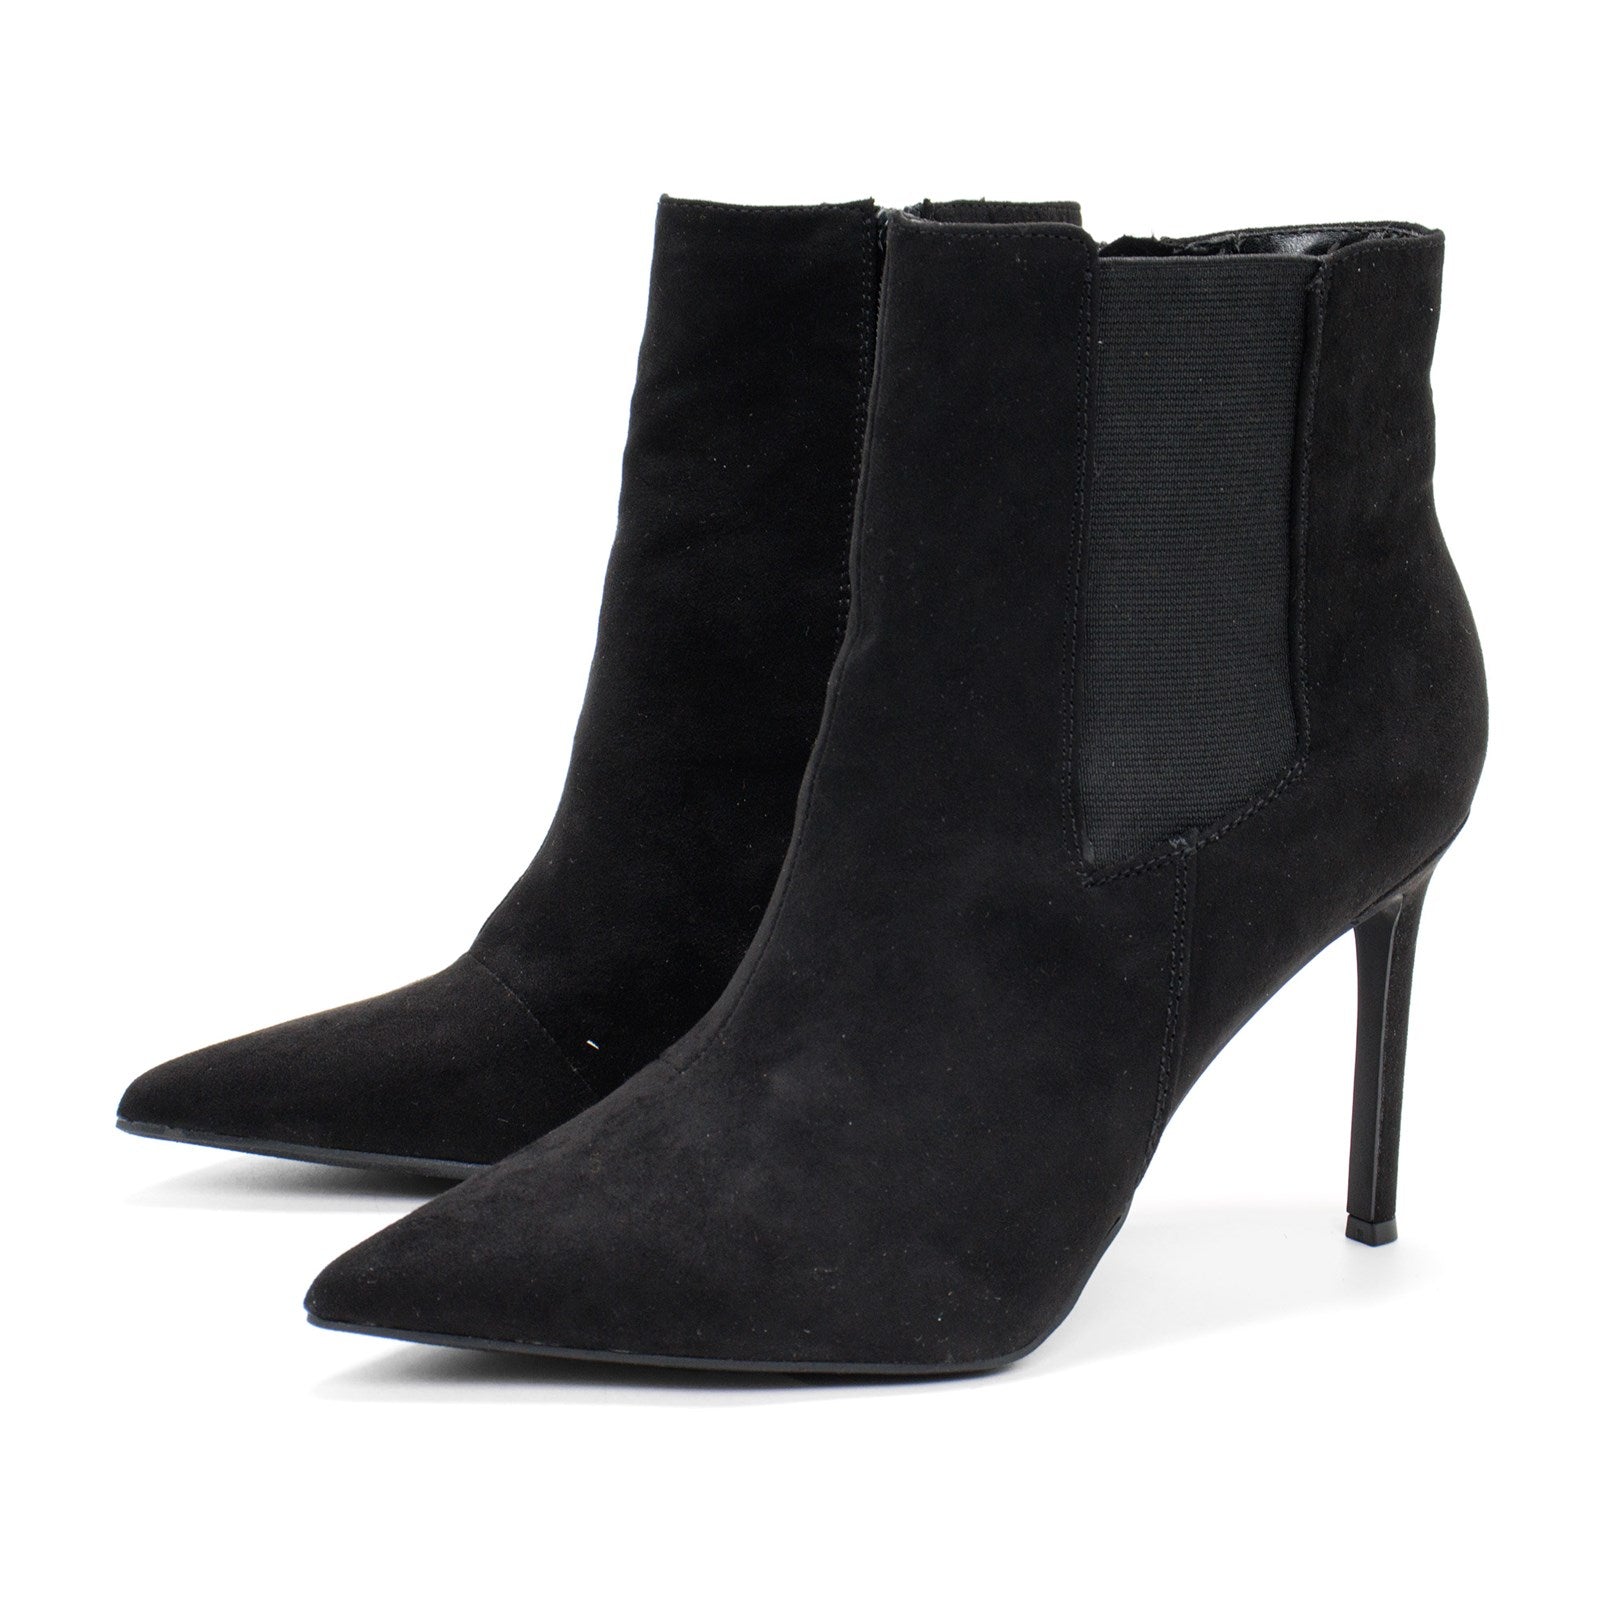 Inc Women Katalina Pointed Toe Ankle Boots